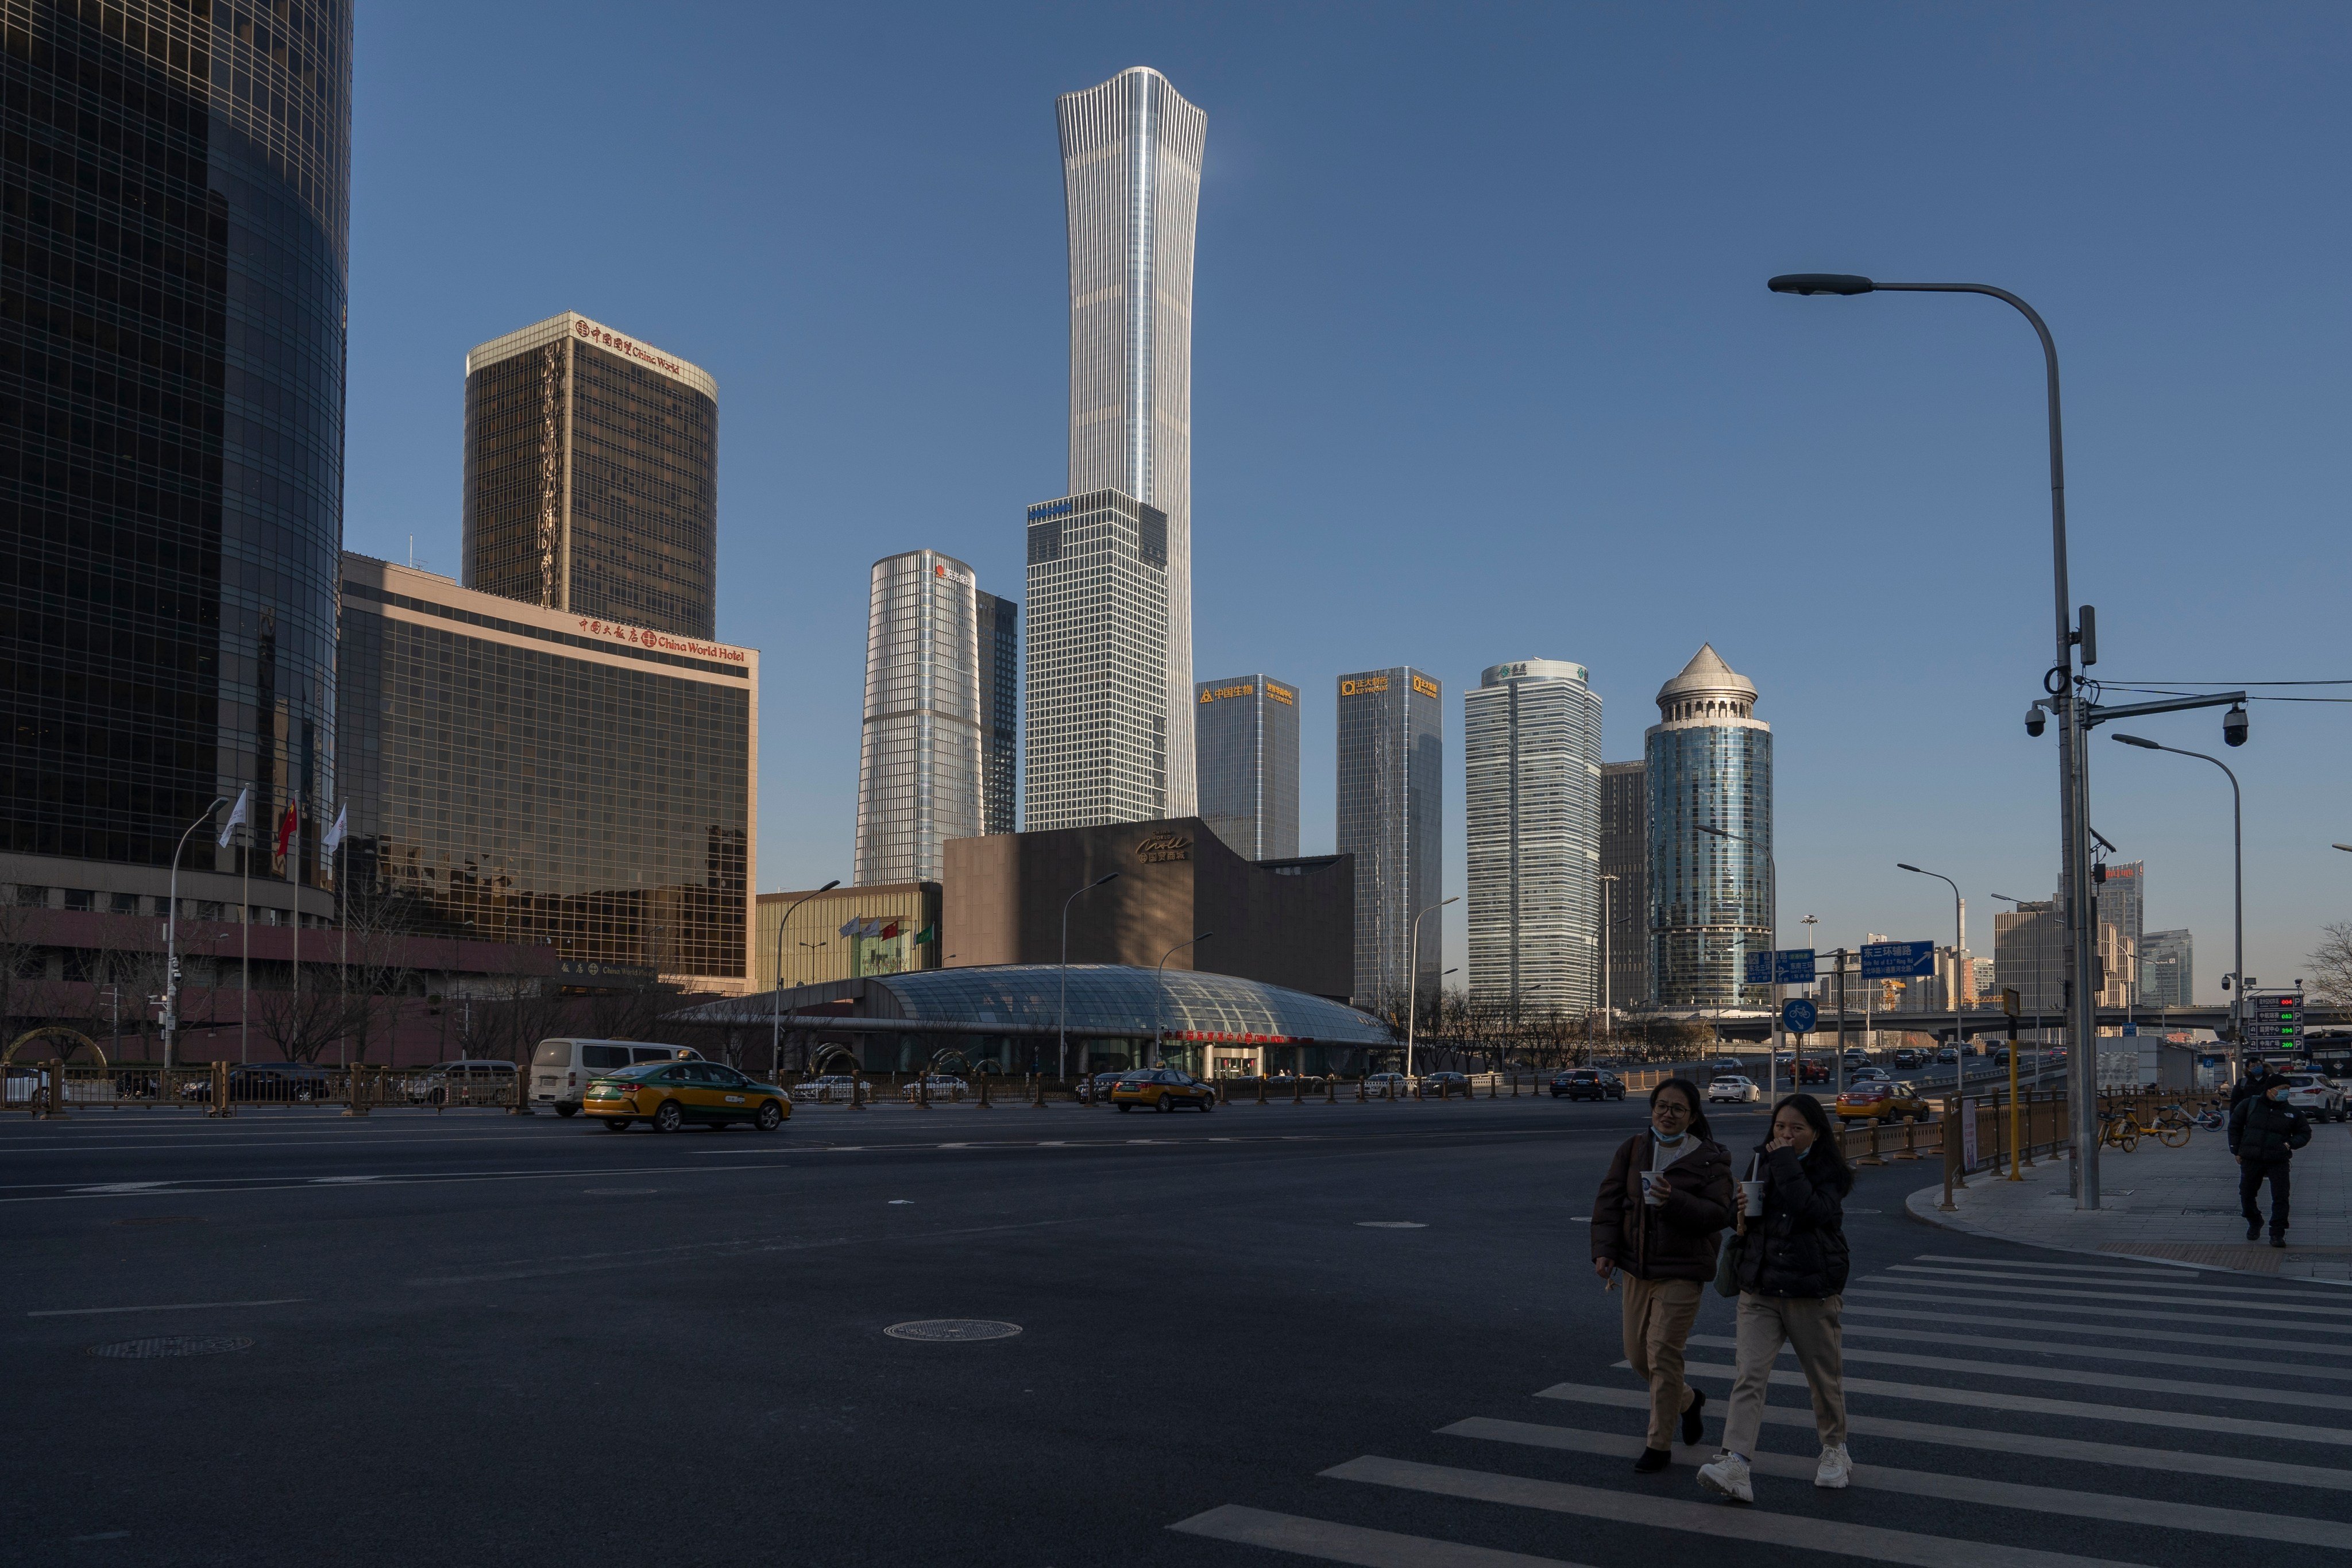 Pedestrians cross a road in Beijing on  December 13. The central government has said its key economic goals for the coming year include counteracting growth pressures and stabilising the economy. Photo: Bloomberg